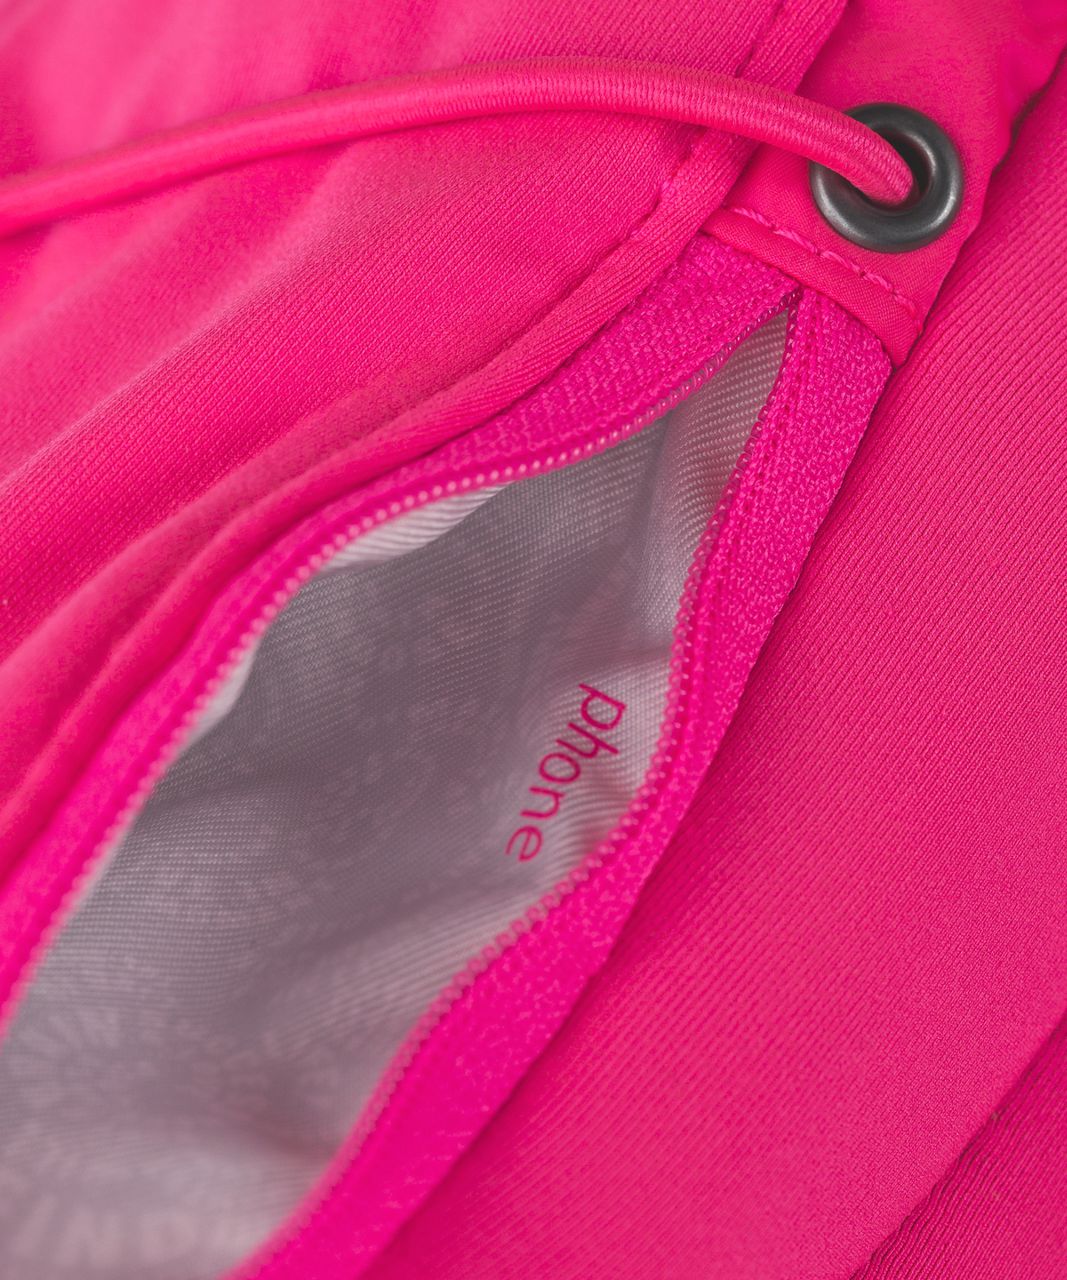 Lululemon Run All Day Backpack - Neon Pink